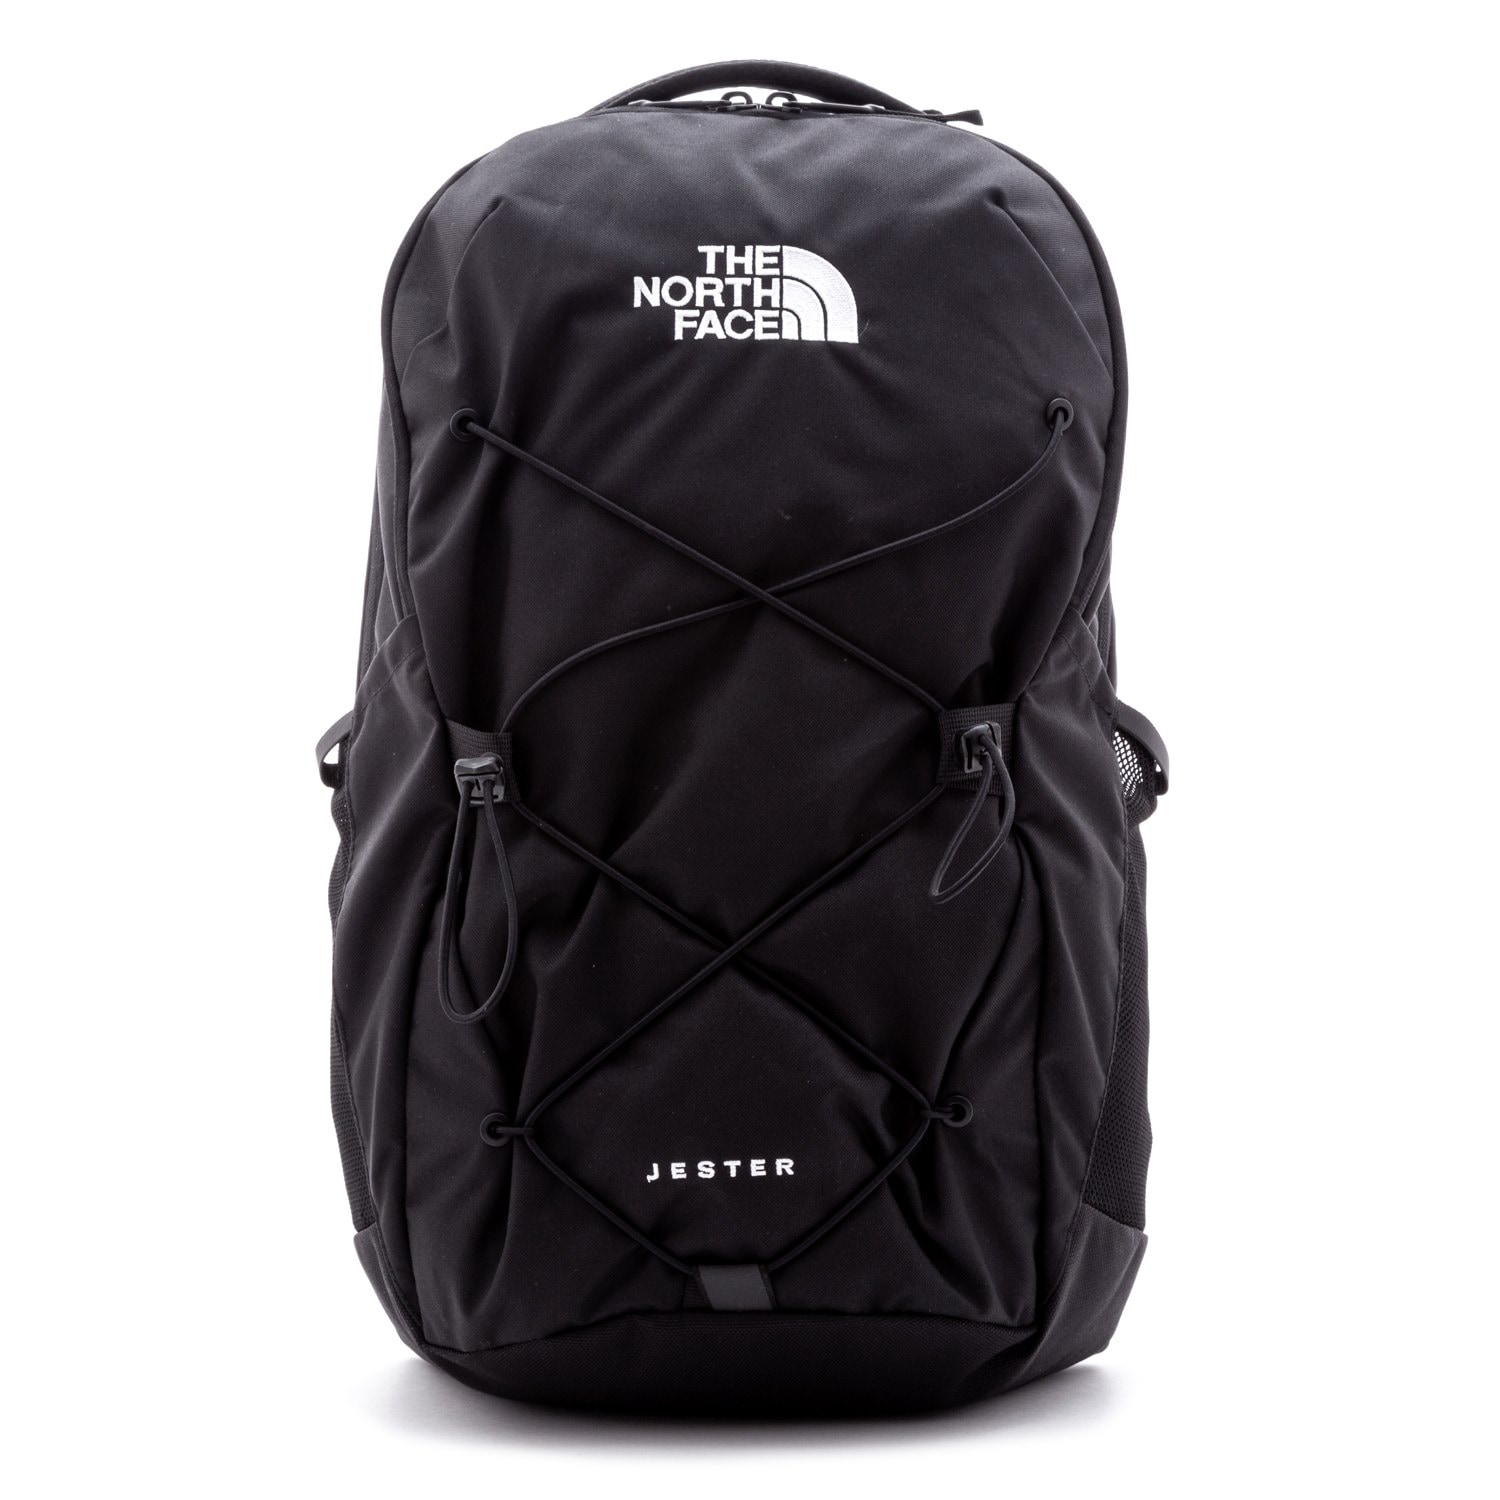 THE NORTH FACE リュックサック ブラック NF0A3VXF